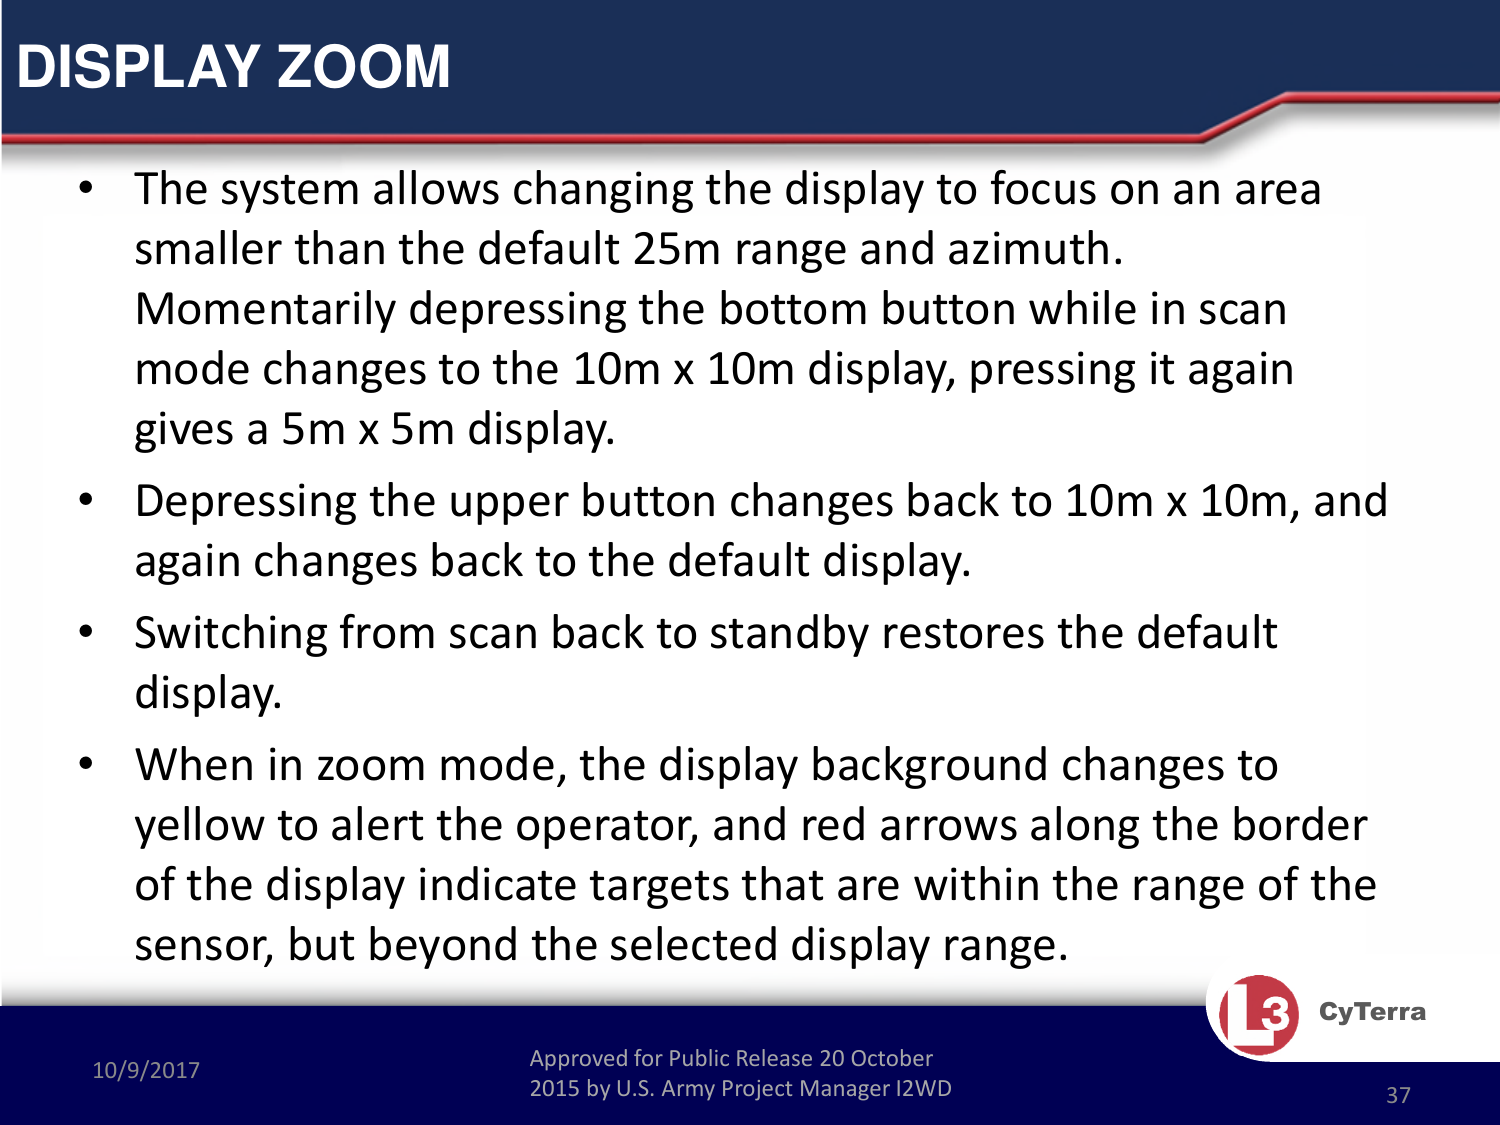 Approved for Public Release 20 October 2015 by U.S. Army Project Manager I2WD10/9/2017 Approved for Public Release 20 October 2015 by U.S. Army Project Manager I2WD 37CyTerra•The system allows changing the display to focus on an area smaller than the default 25m range and azimuth.  Momentarily depressing the bottom button while in scan mode changes to the 10m x 10m display, pressing it again gives a 5m x 5m display. •Depressing the upper button changes back to 10m x 10m, and again changes back to the default display.•Switching from scan back to standby restores the default display.•When in zoom mode, the display background changes to yellow to alert the operator, and red arrows along the border of the display indicate targets that are within the range of the sensor, but beyond the selected display range.DISPLAY ZOOM